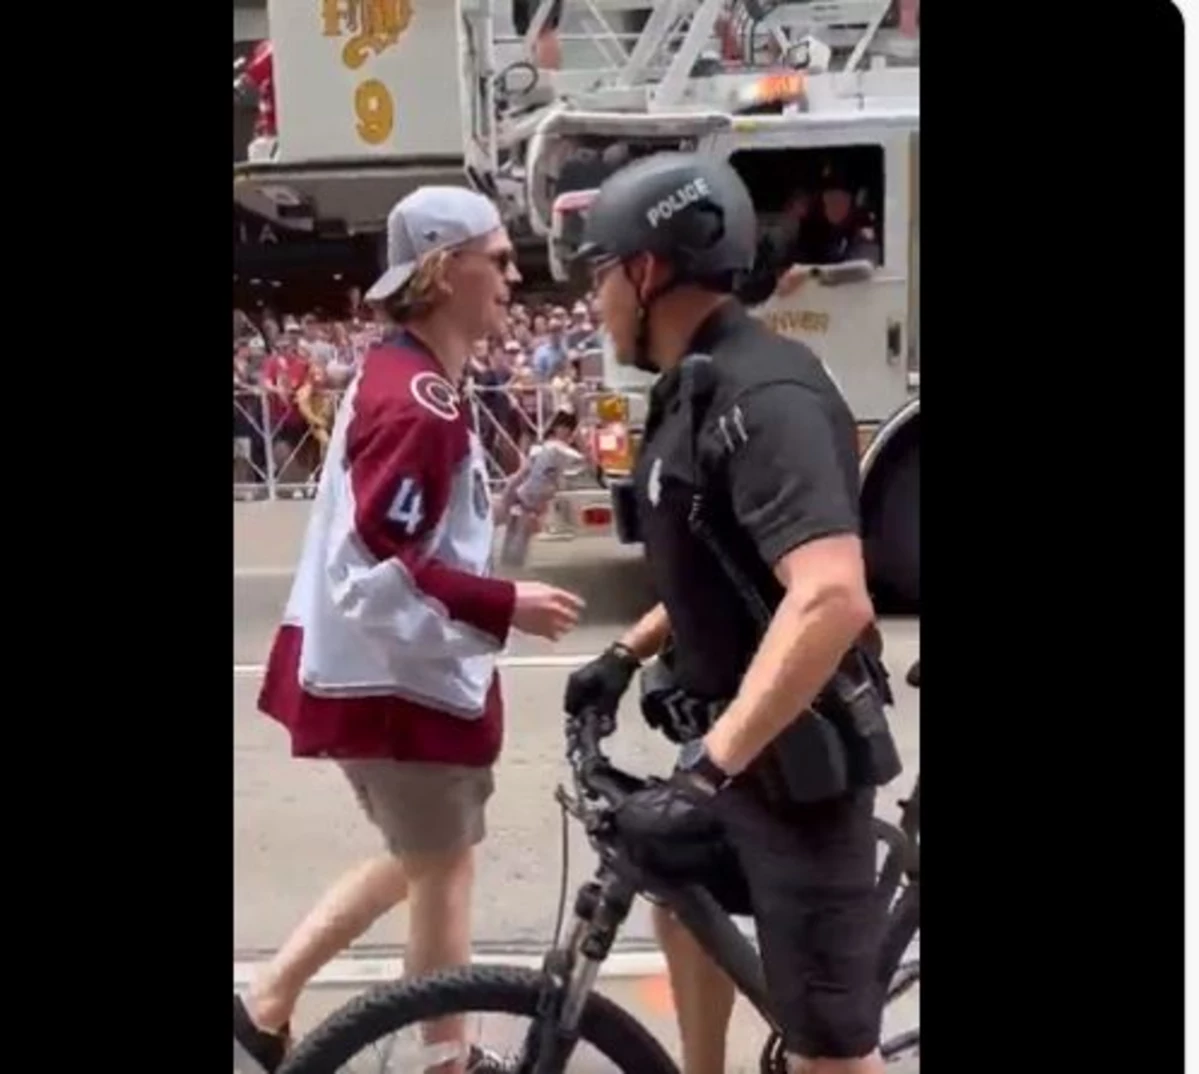 Police officer mistakes Bowen Byram for fan at Stanley Cup parade